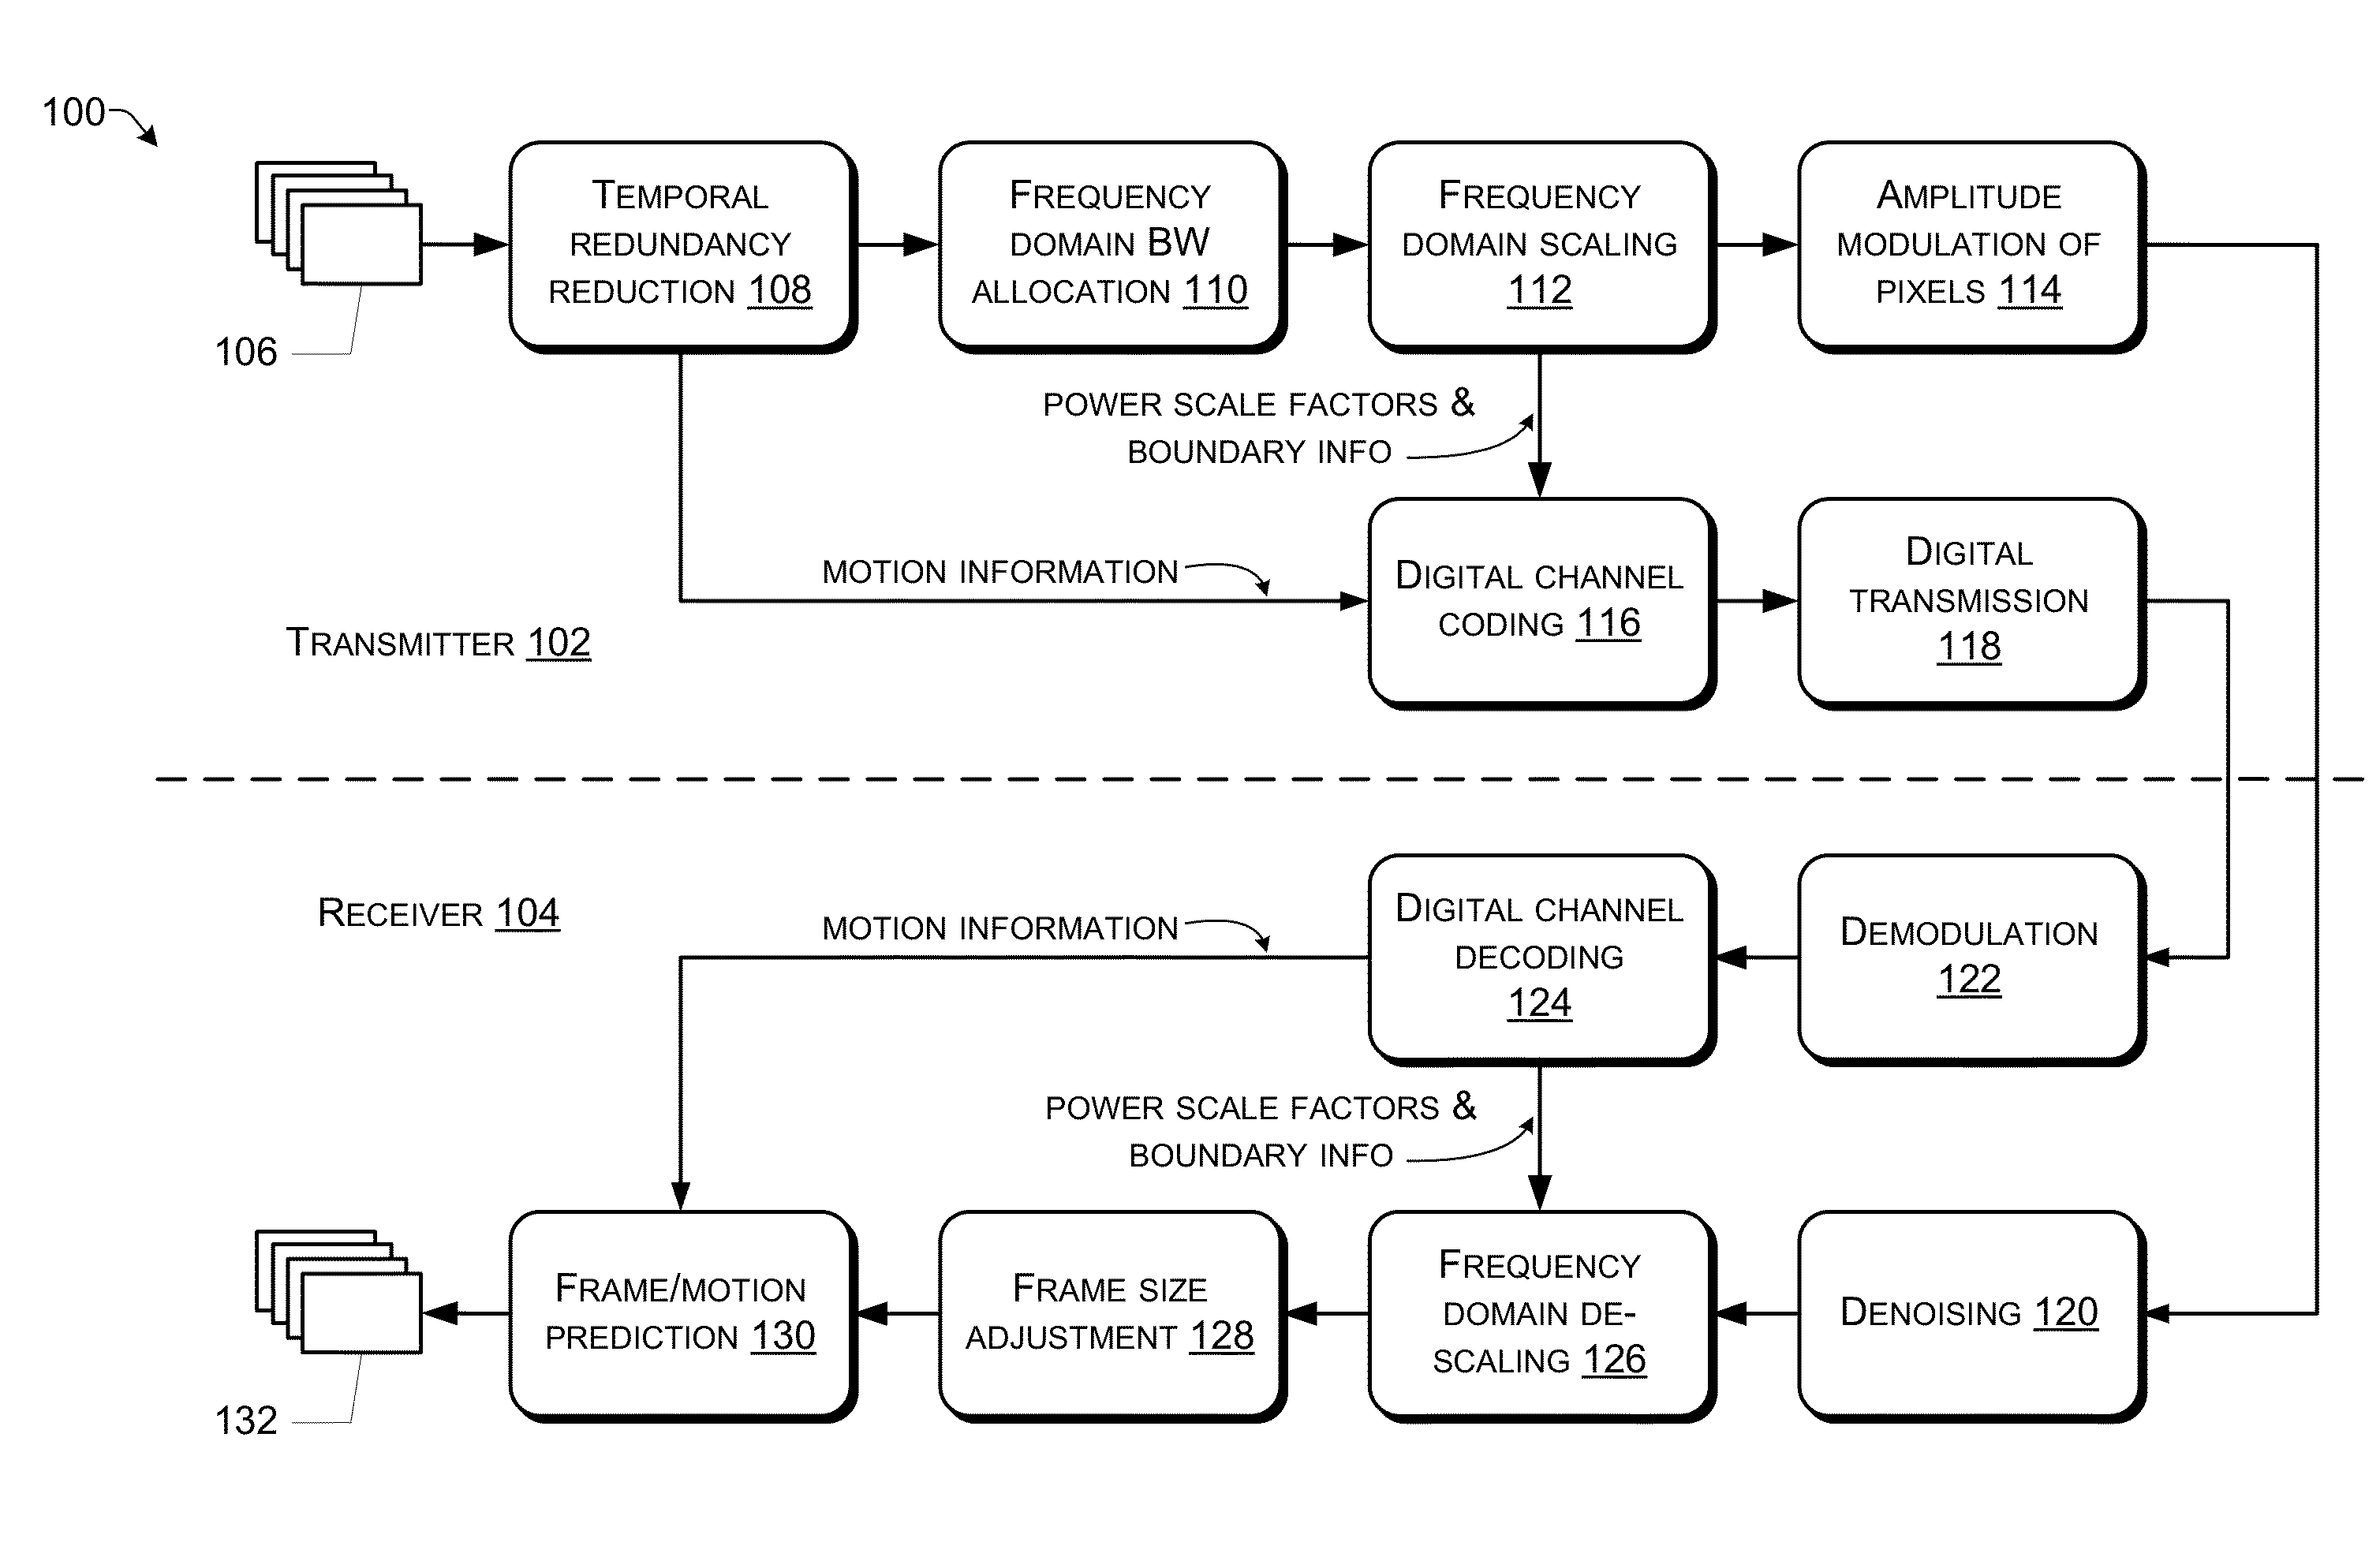 Scaled video for pseudo-analog transmission in spatial domain